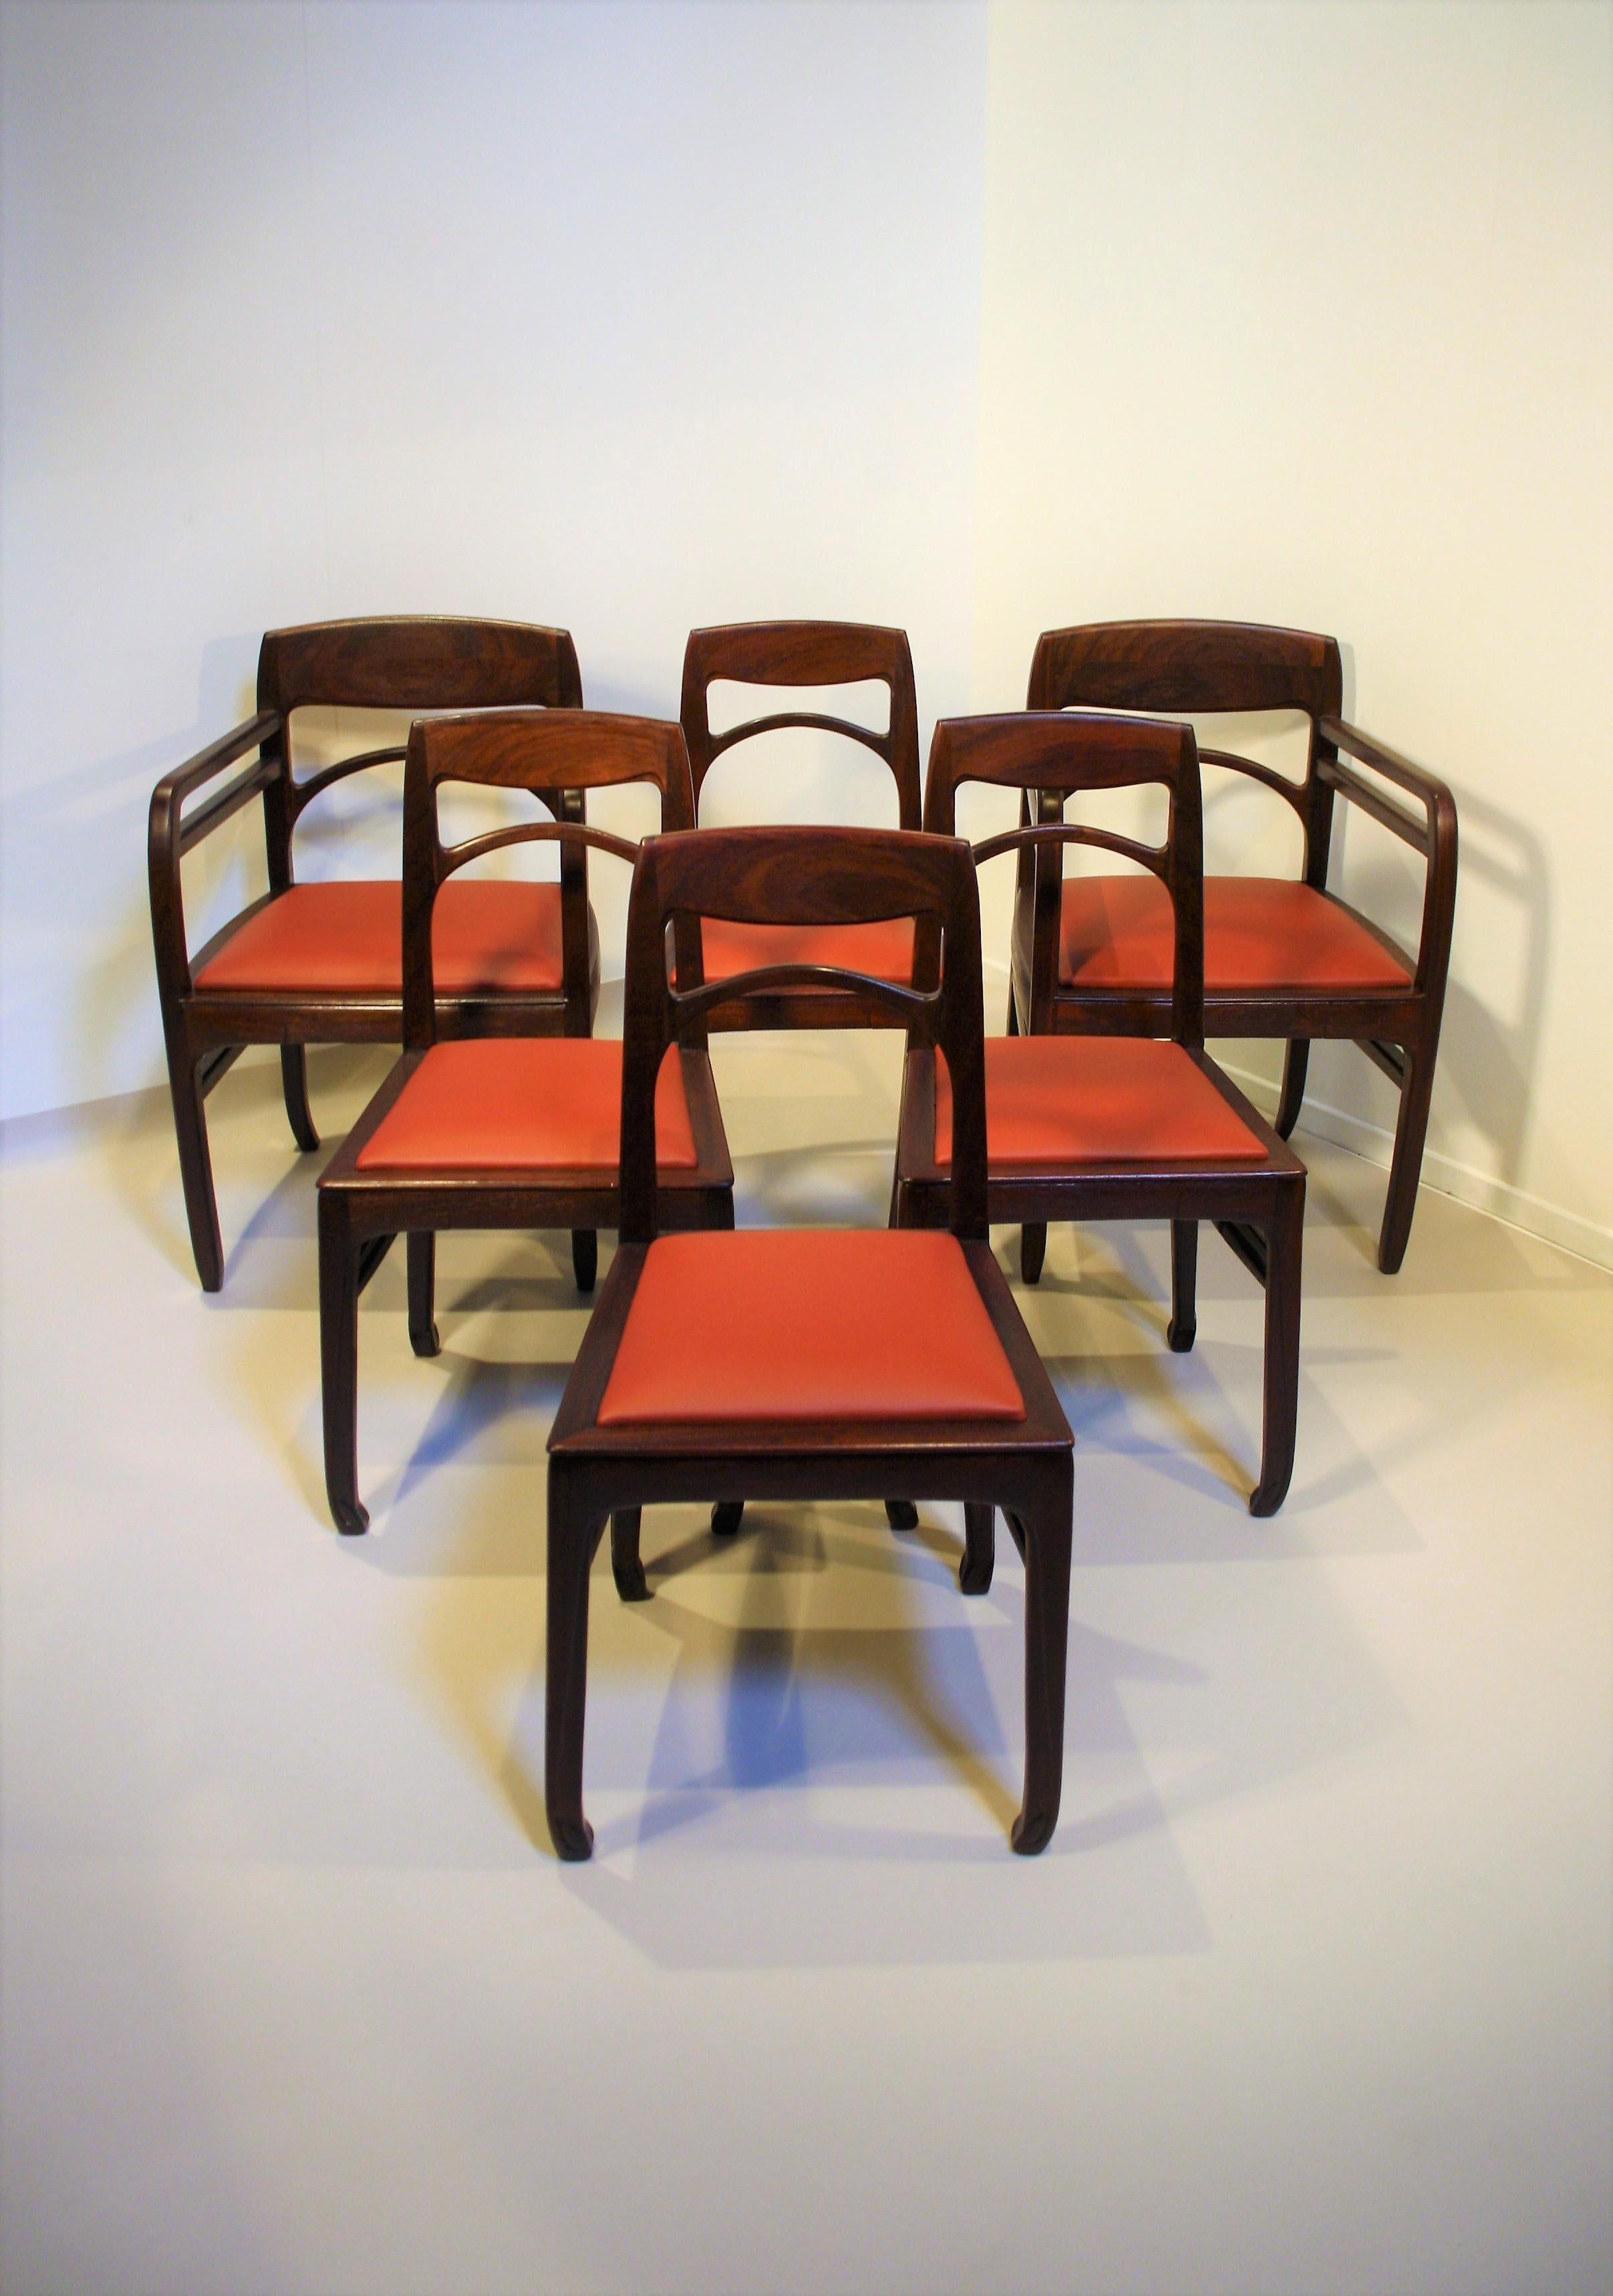 A complete set of six Richard Riemerschmid (1868-1957) rosewood chairs consisting of four dining room chairs and two armchairs.
What so special is that this set is complete and made from solid Rosewood from Rio.
The chairs are in a very good